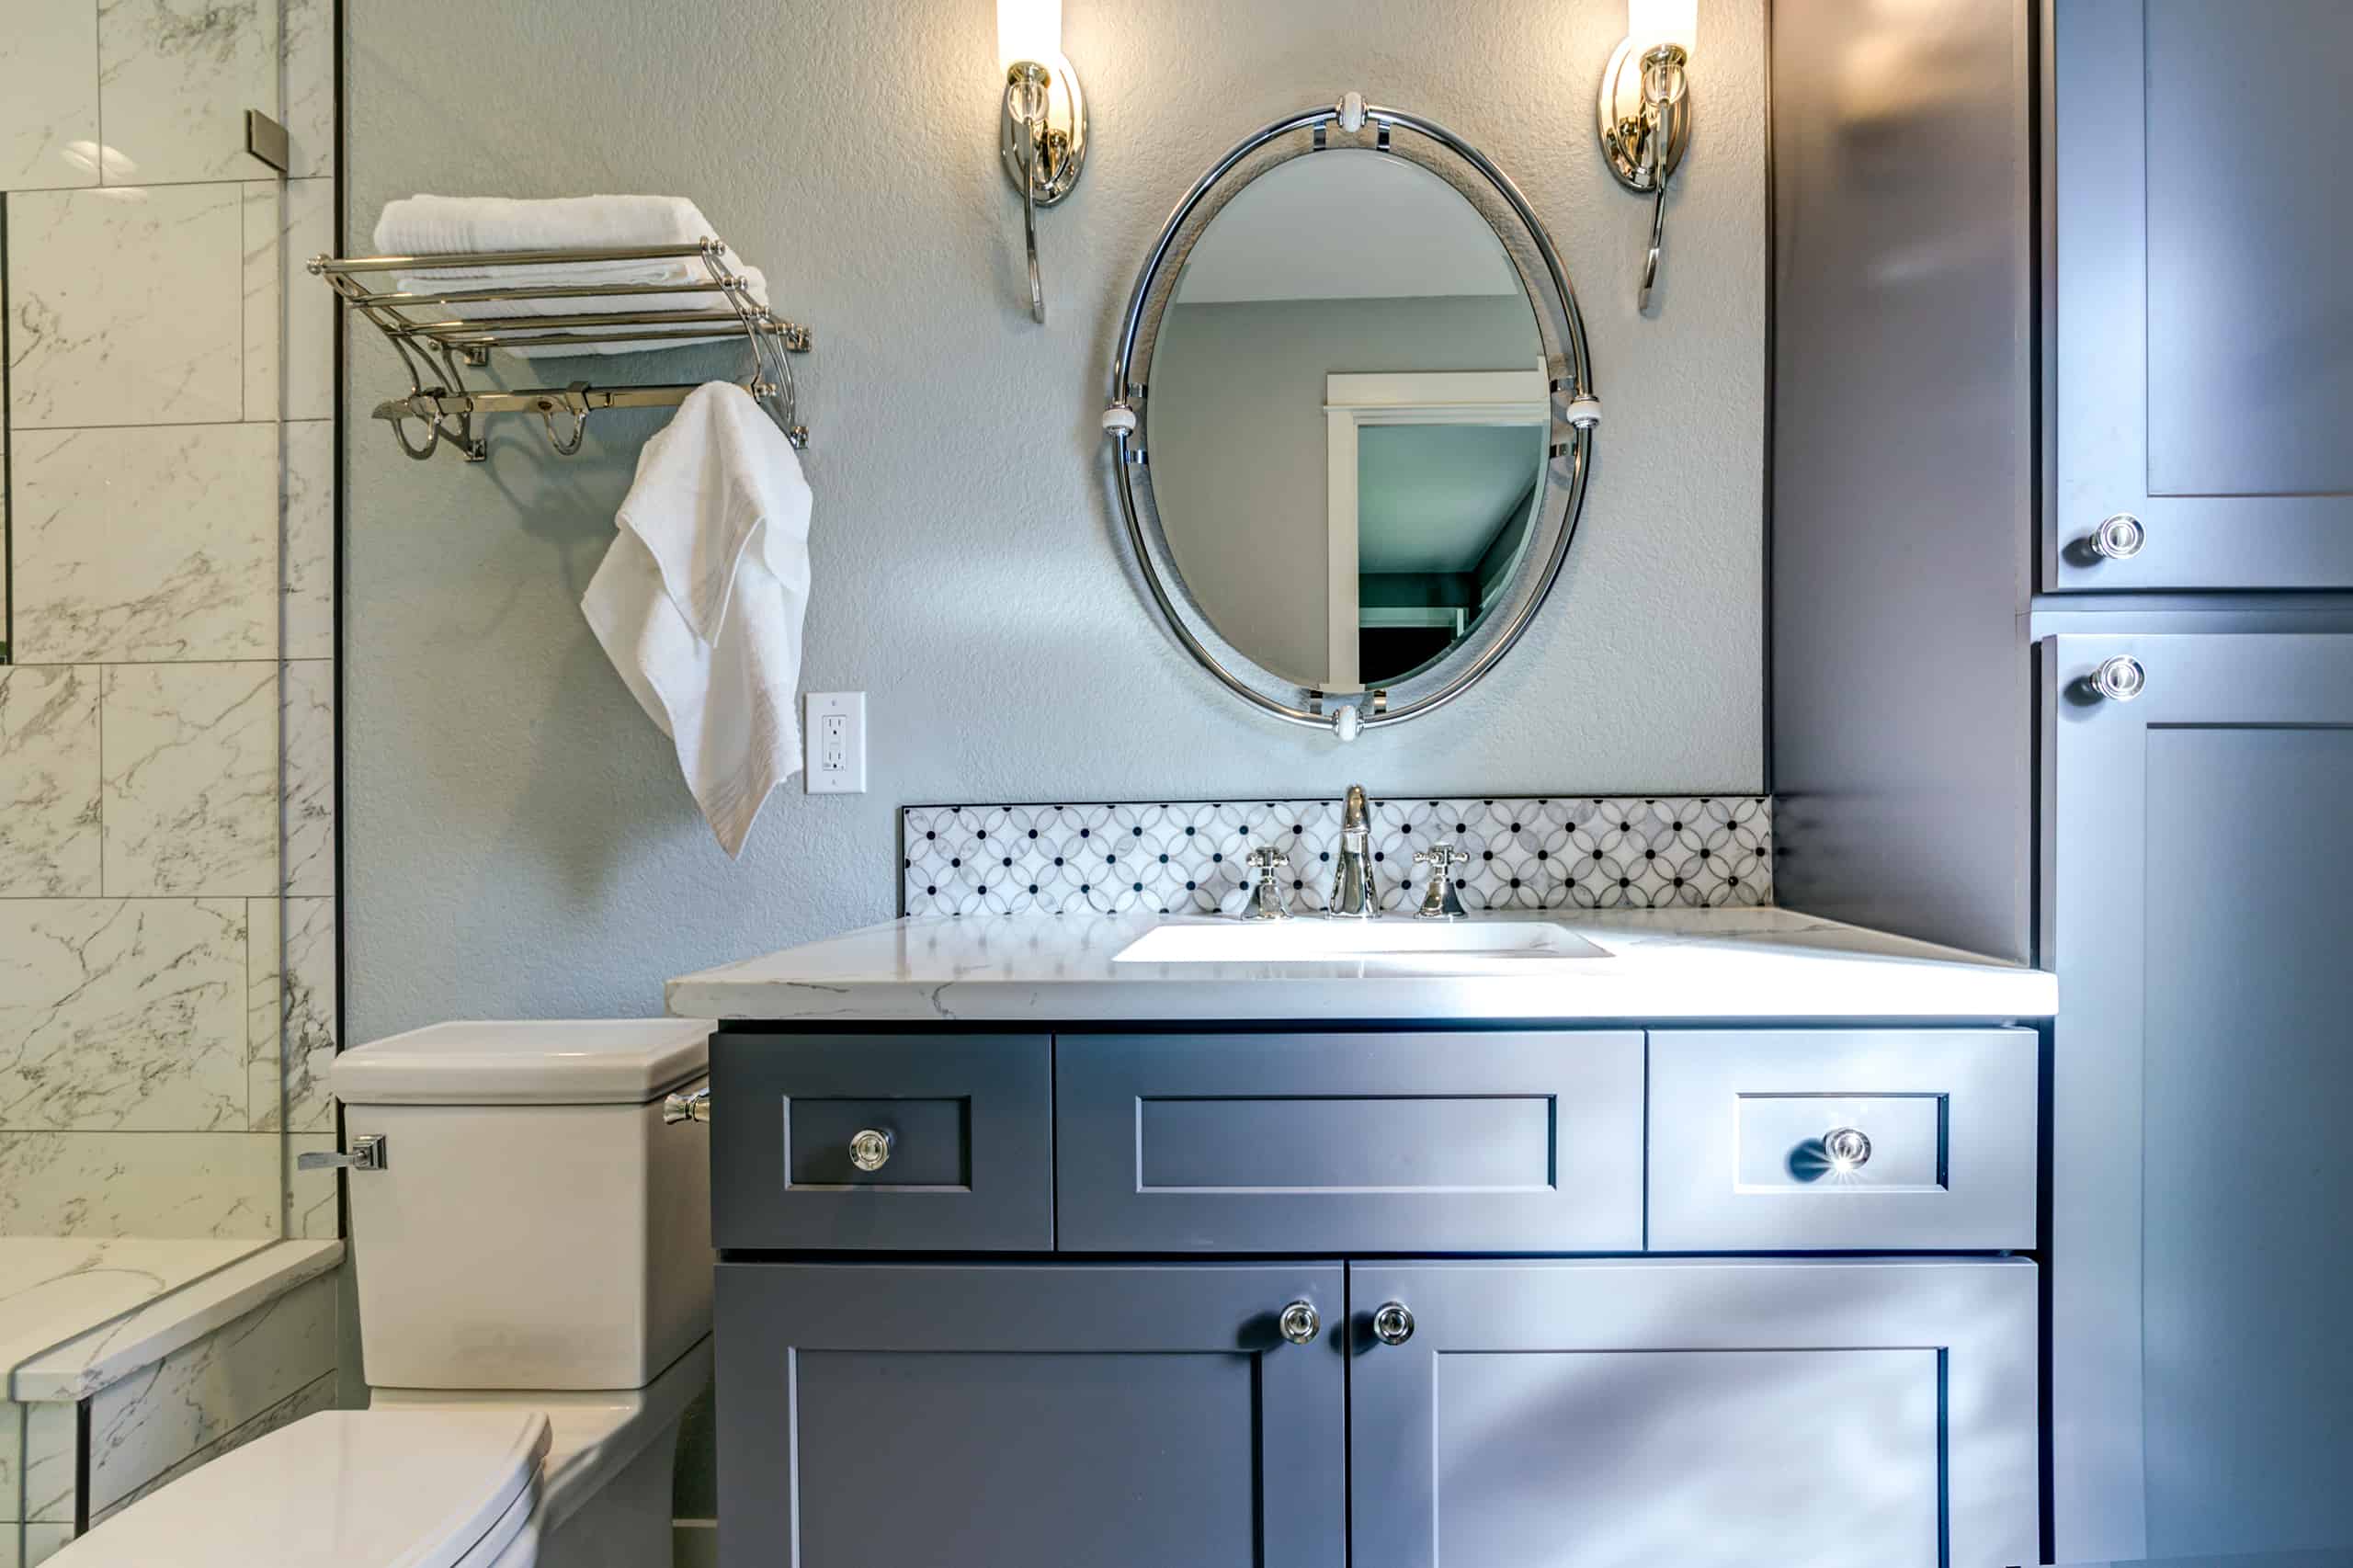 Cabinet Hardware Placement Guide, Hardware For Bathroom Vanity